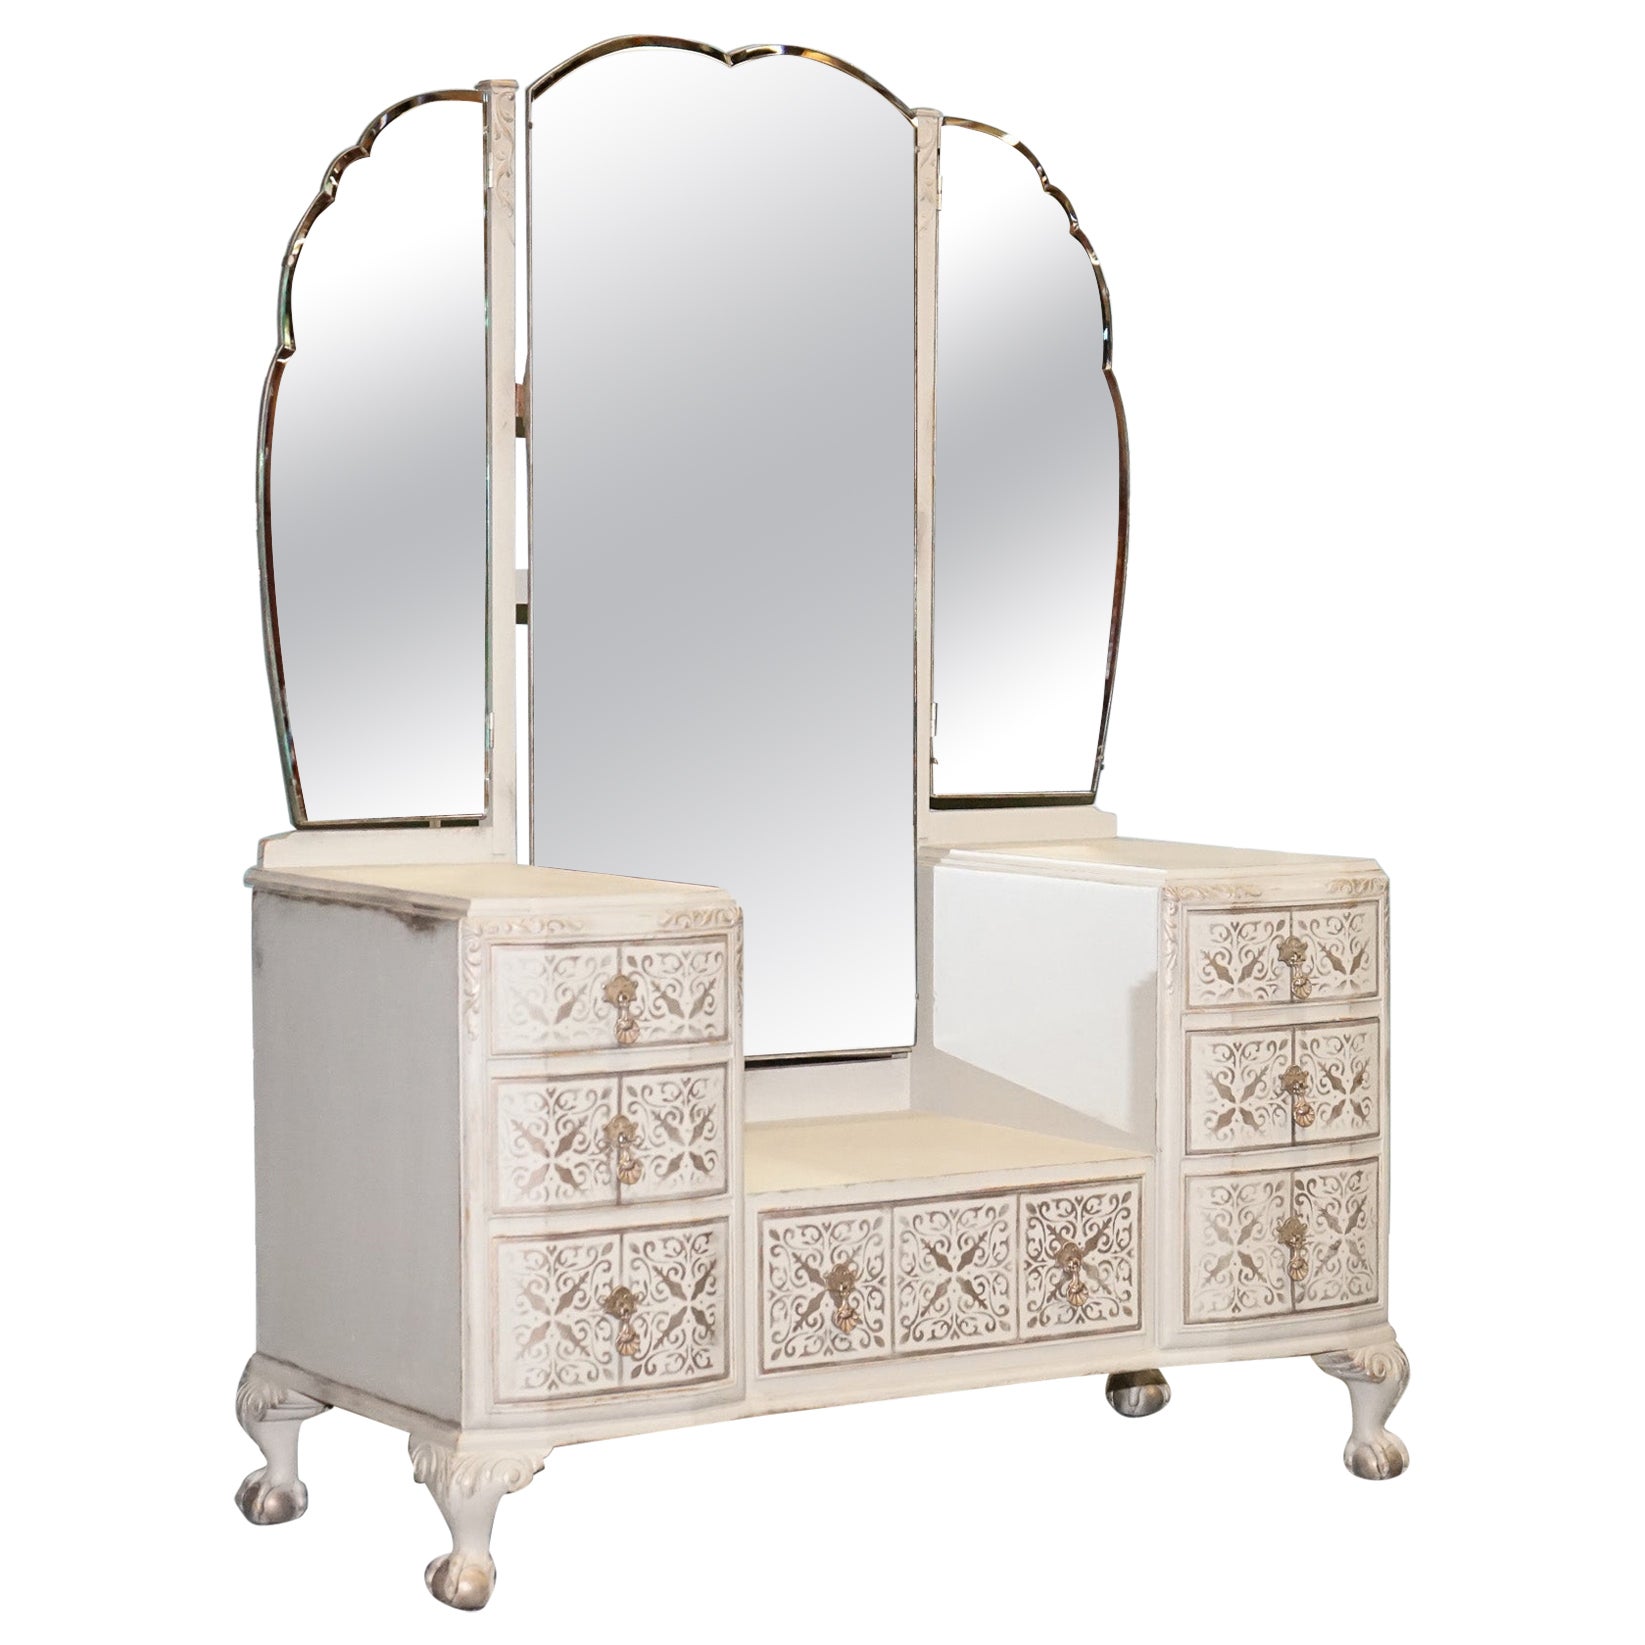 Waring & Gillow 1932 Antiqued Hand Painted Beige Bronze Patterns Dressing Table